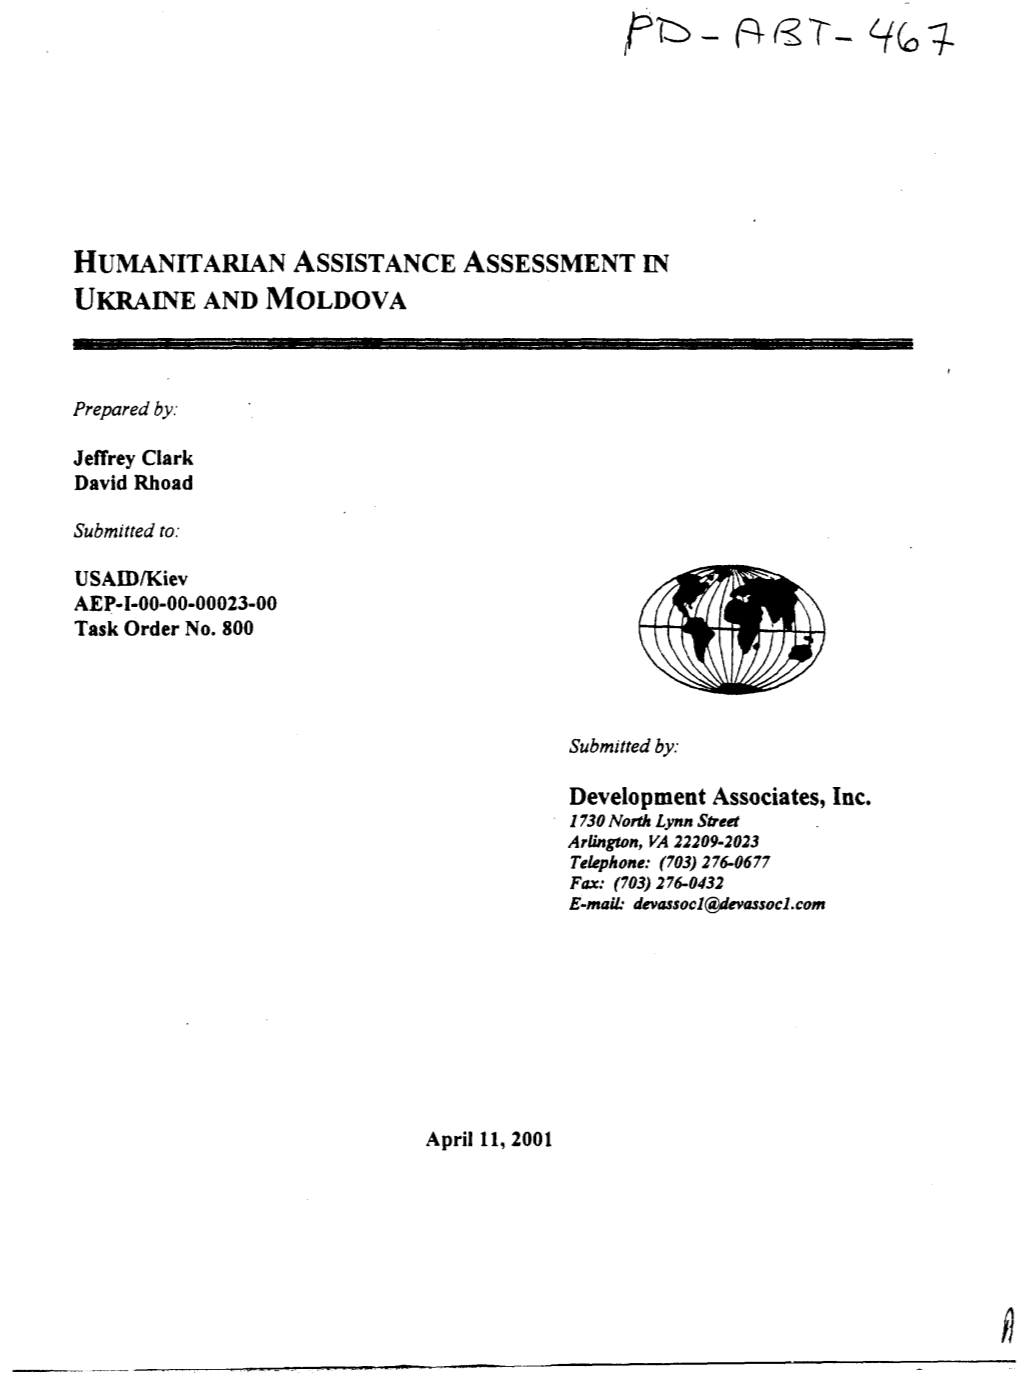 HUMANITARIAN ASSISTANCE ASSESSMENT M UKRAINE AND